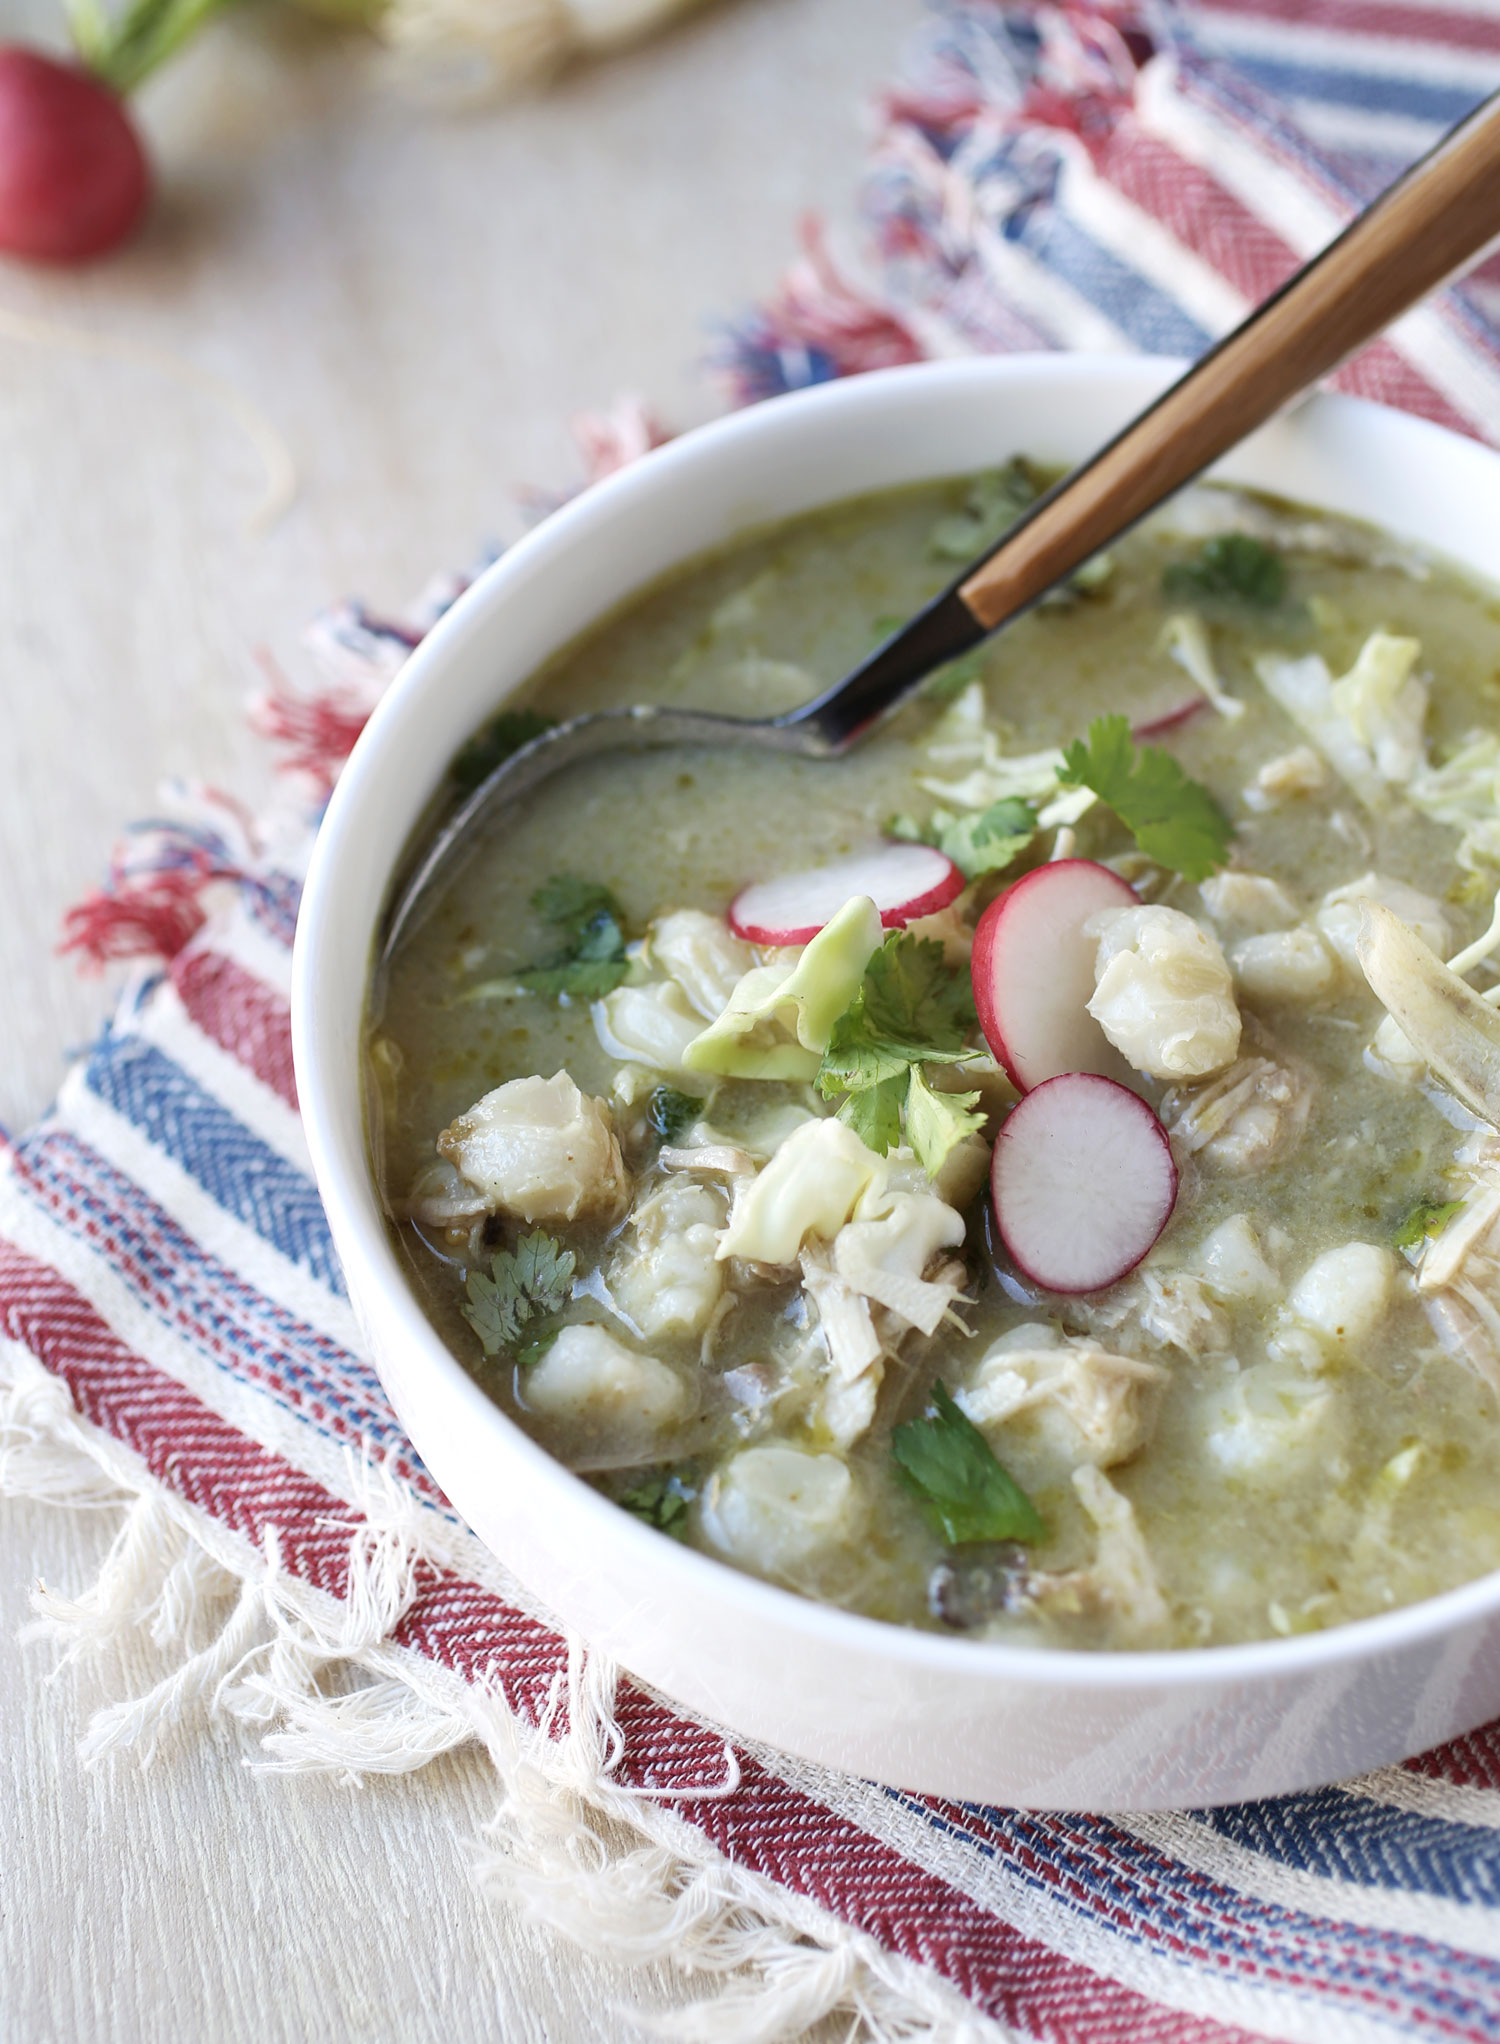 Authentic Mexican Pozole Recipe for Warming Winter Meals